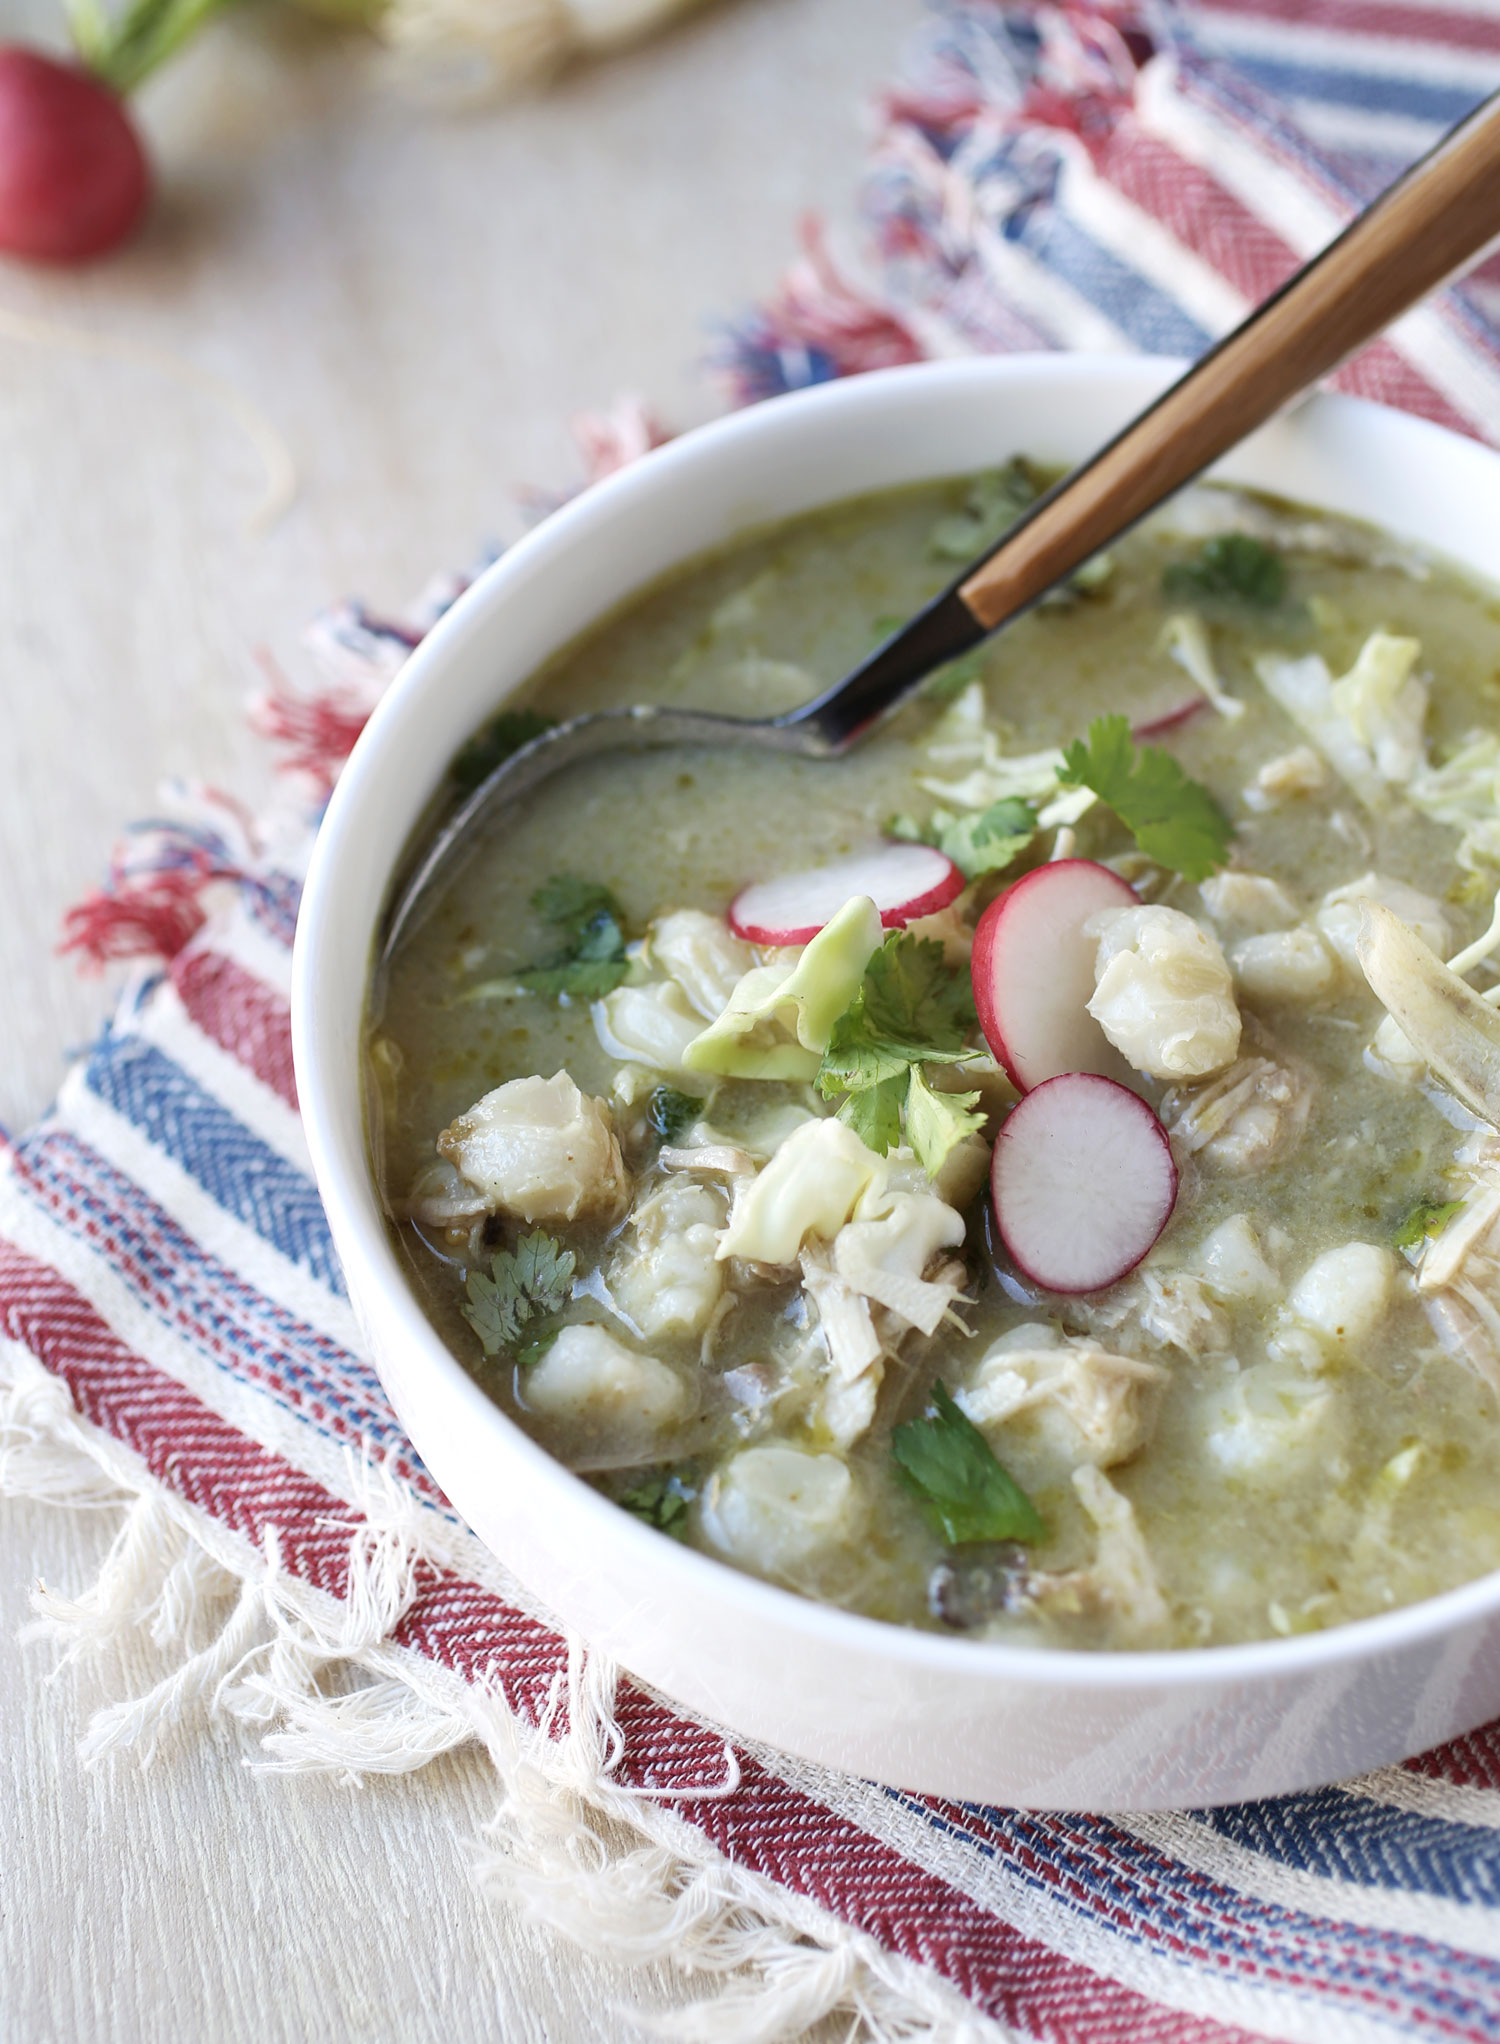 Authentic Mexican Pozole Recipe for Warming Winter Meals